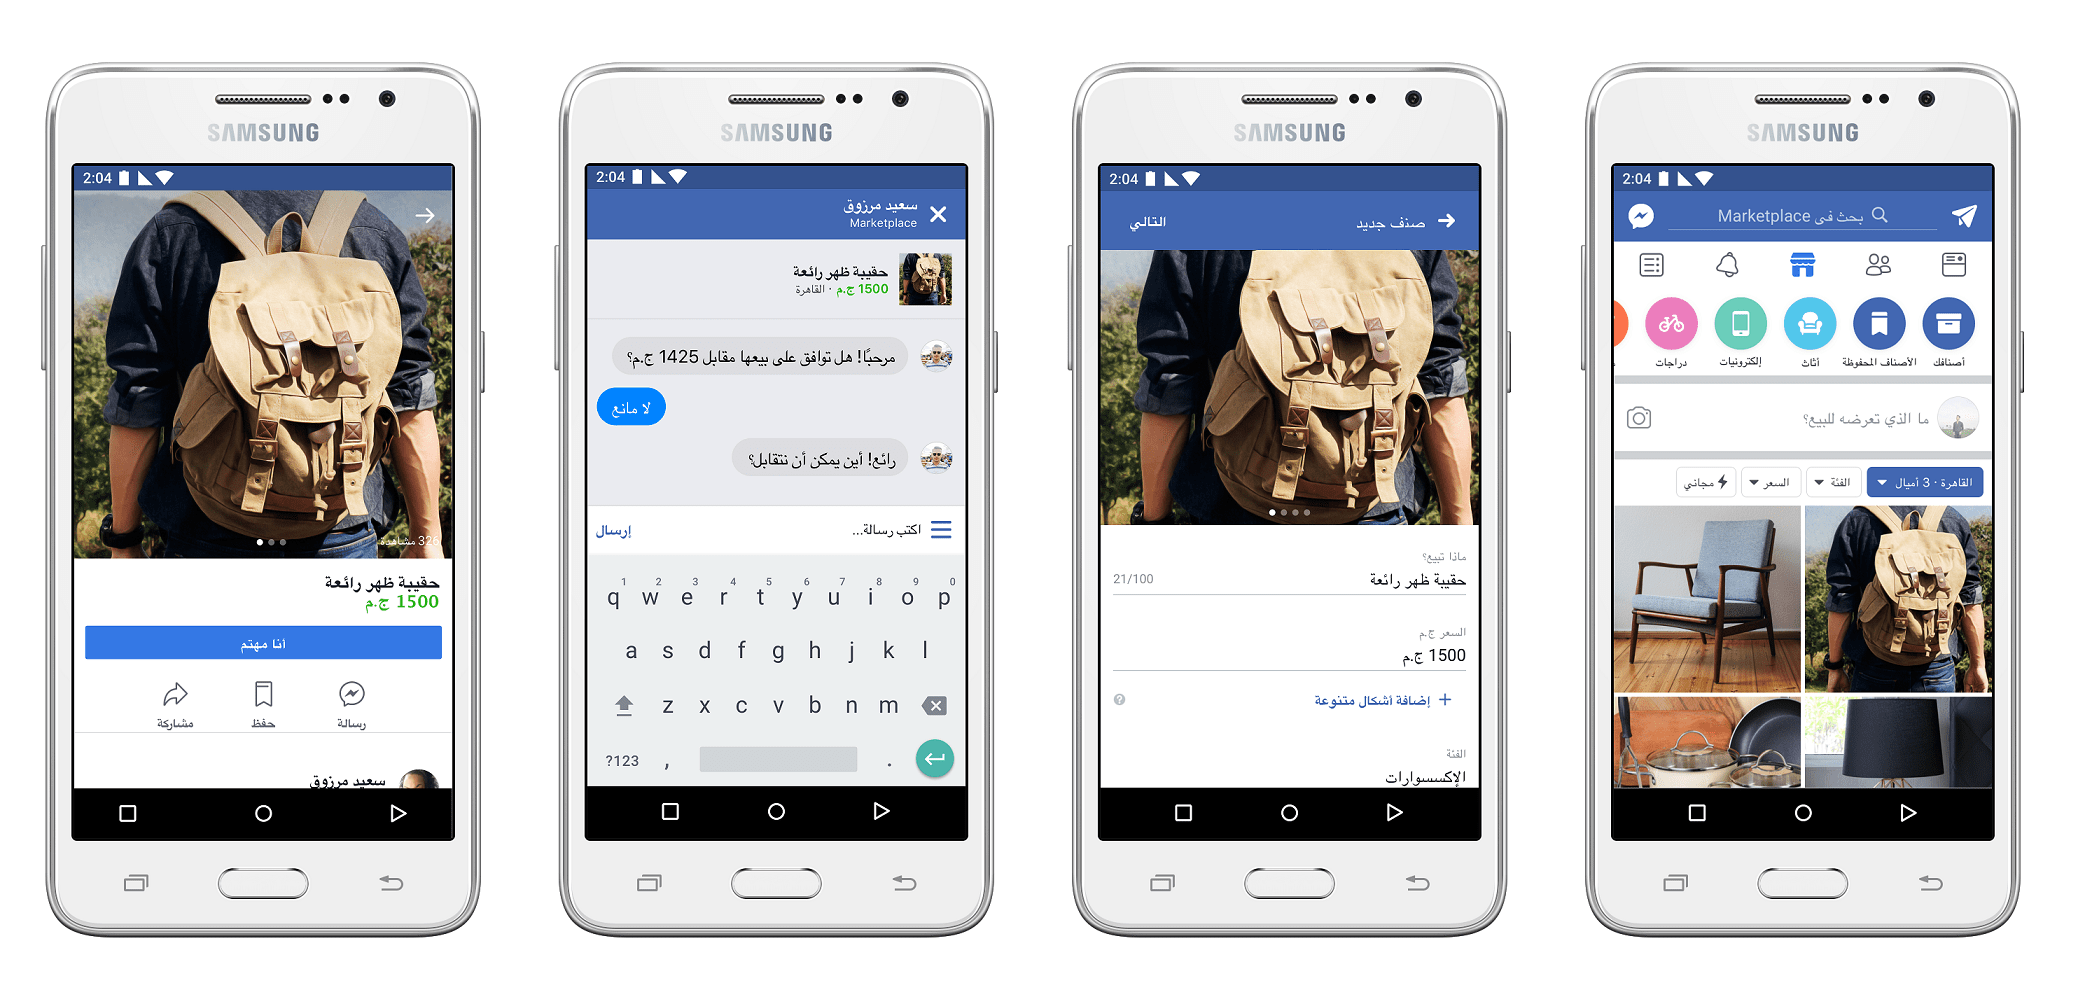 Facebook launches 'Marketplace' platform in MENA, Facebook launches Arabic online Marketplace platform in Egypt